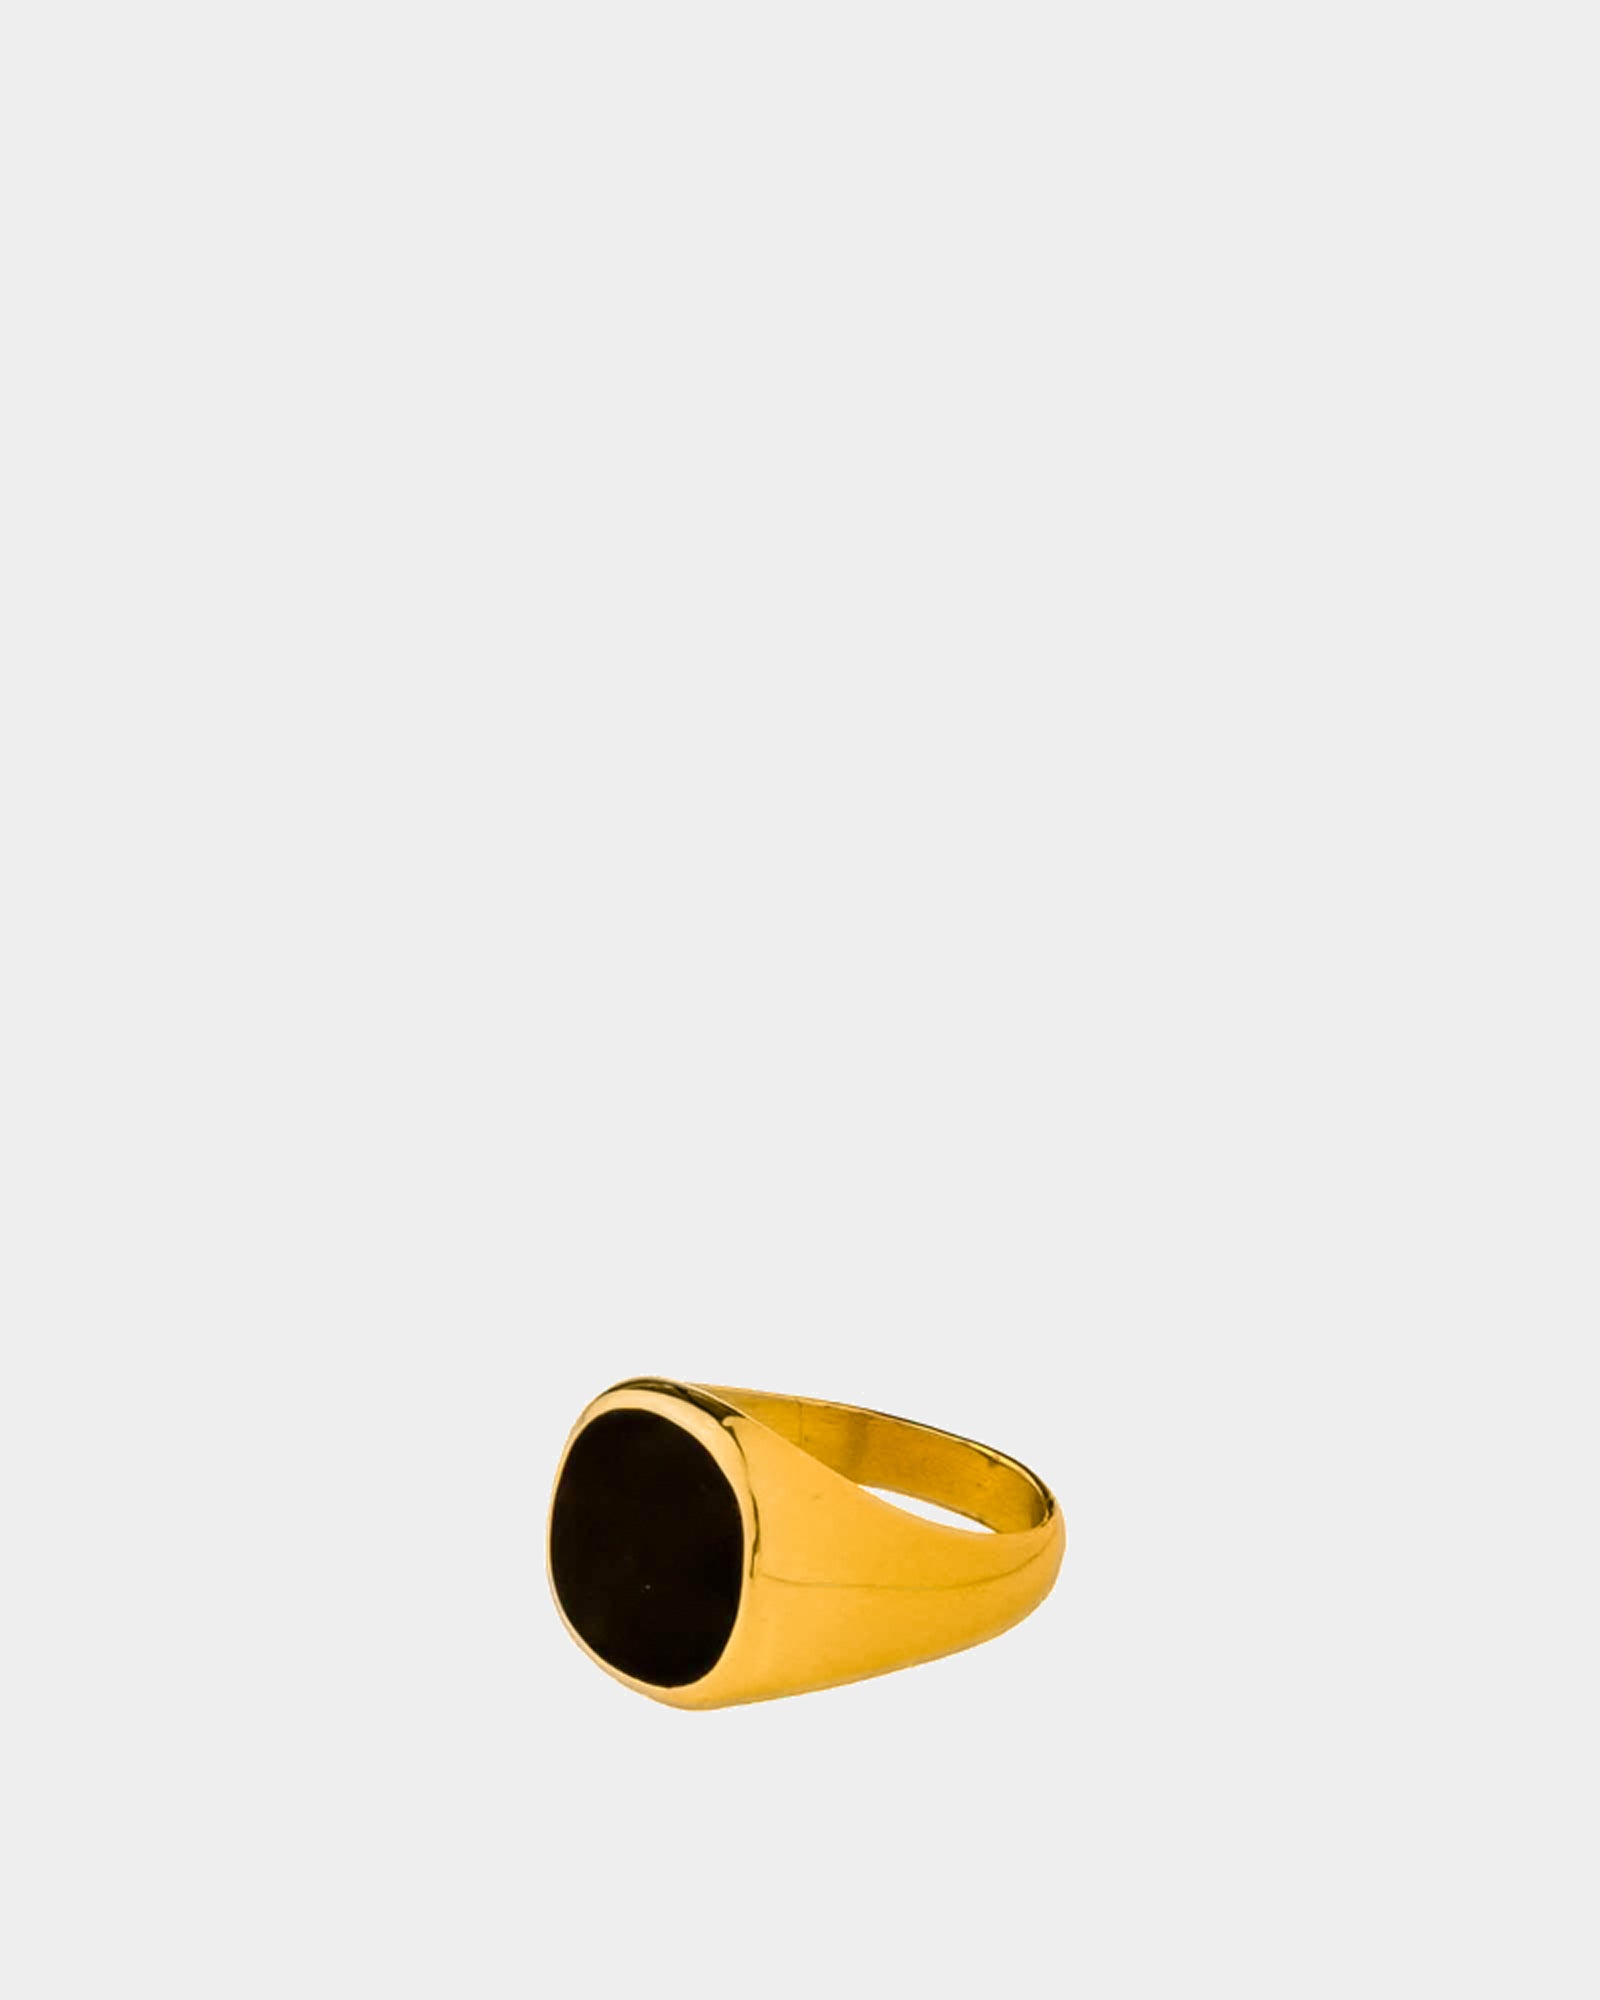 Golden Stainless Steel Ring With Black Stone - Stainless Steel Rings - Online Unissex Jewelry - Dicci